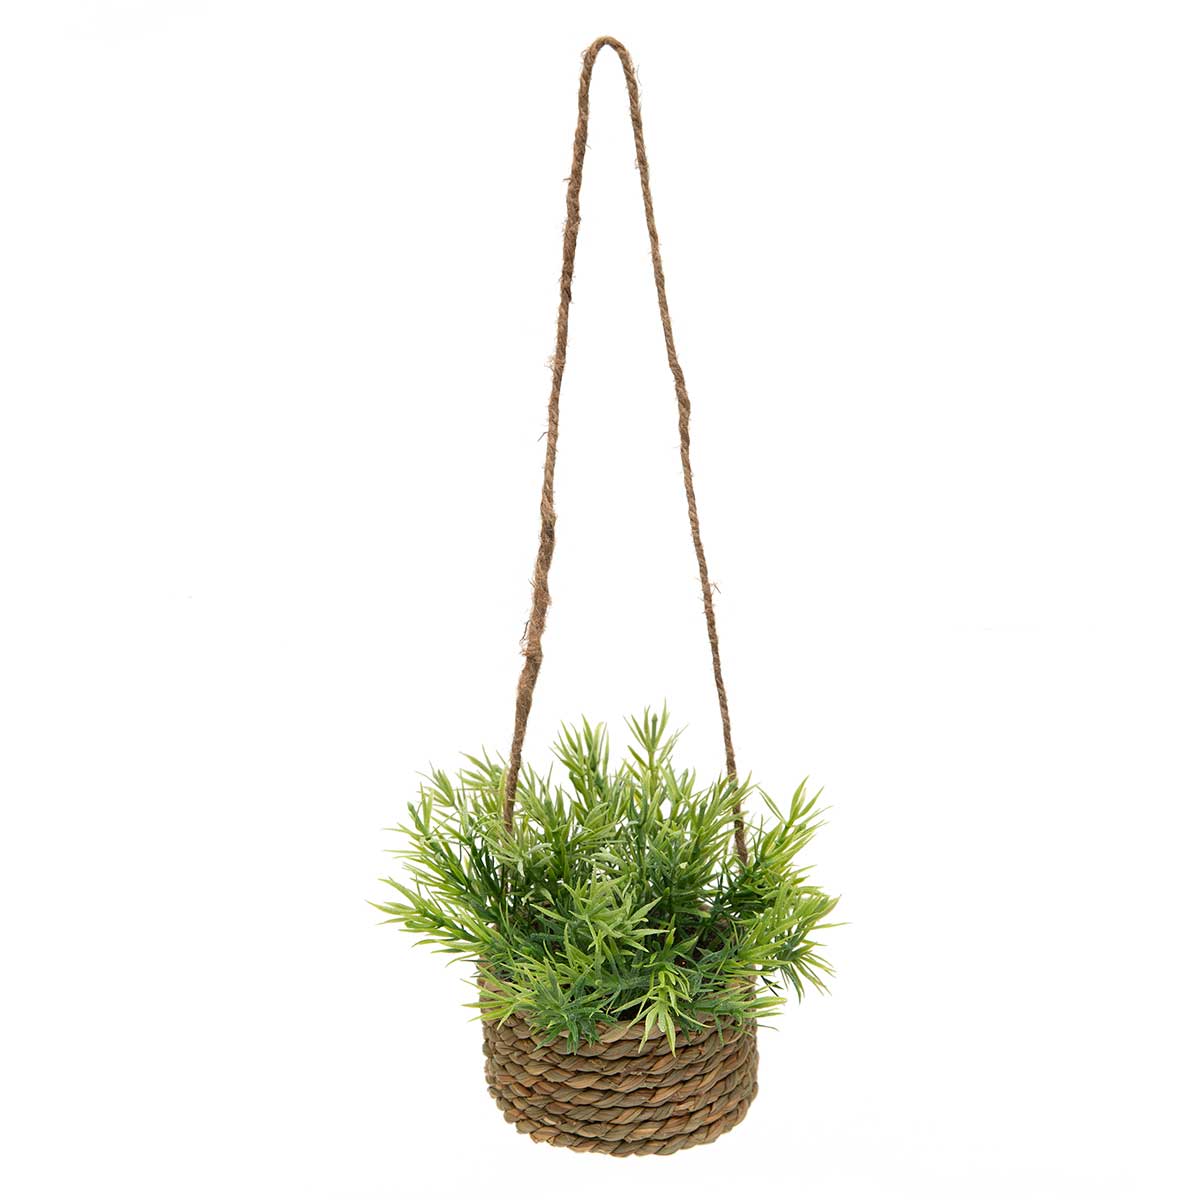 ROSEMARY IN BASKET 5IN X 4.5IN WITH TWINE HANGER - Click Image to Close